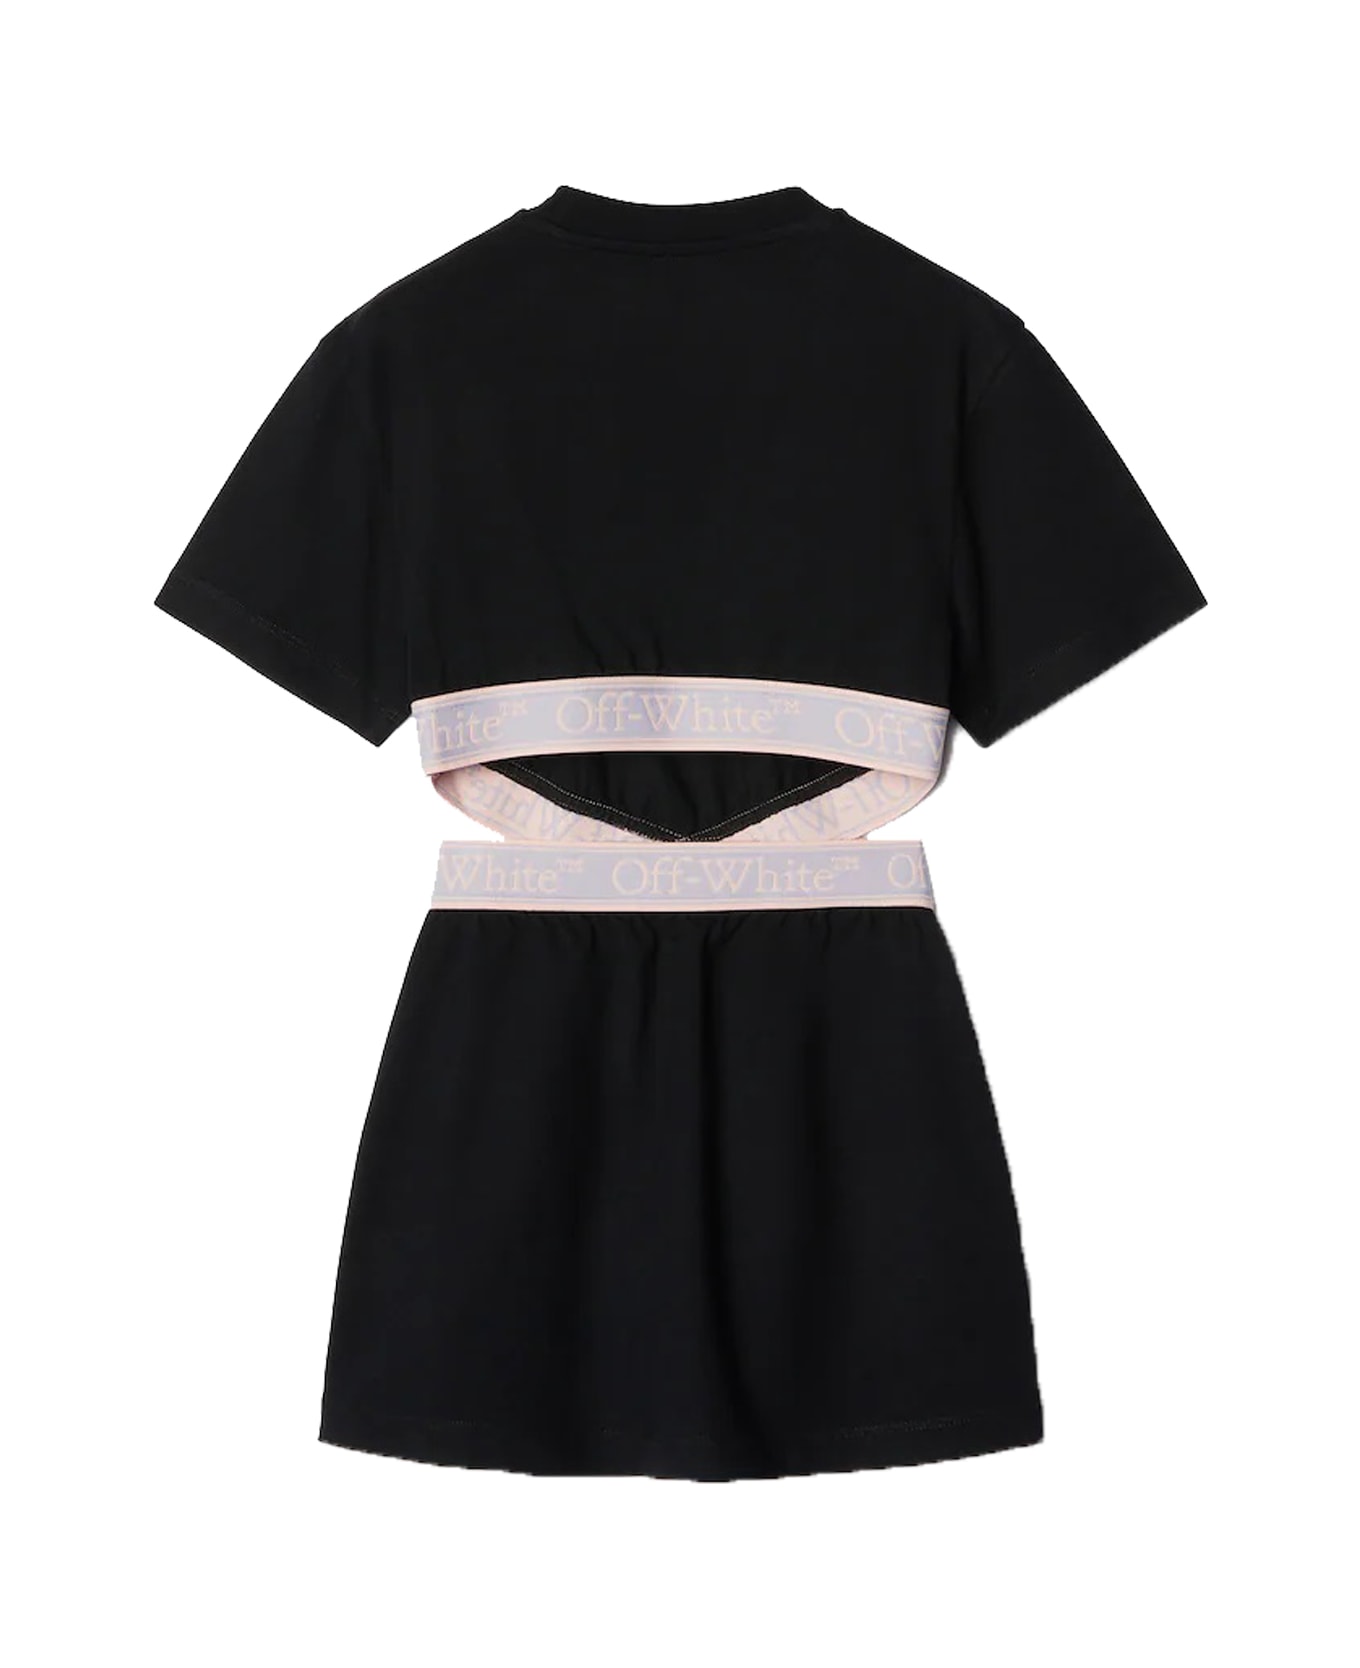 Off-White T-shirt Style Dress With Bookish Logo - Back